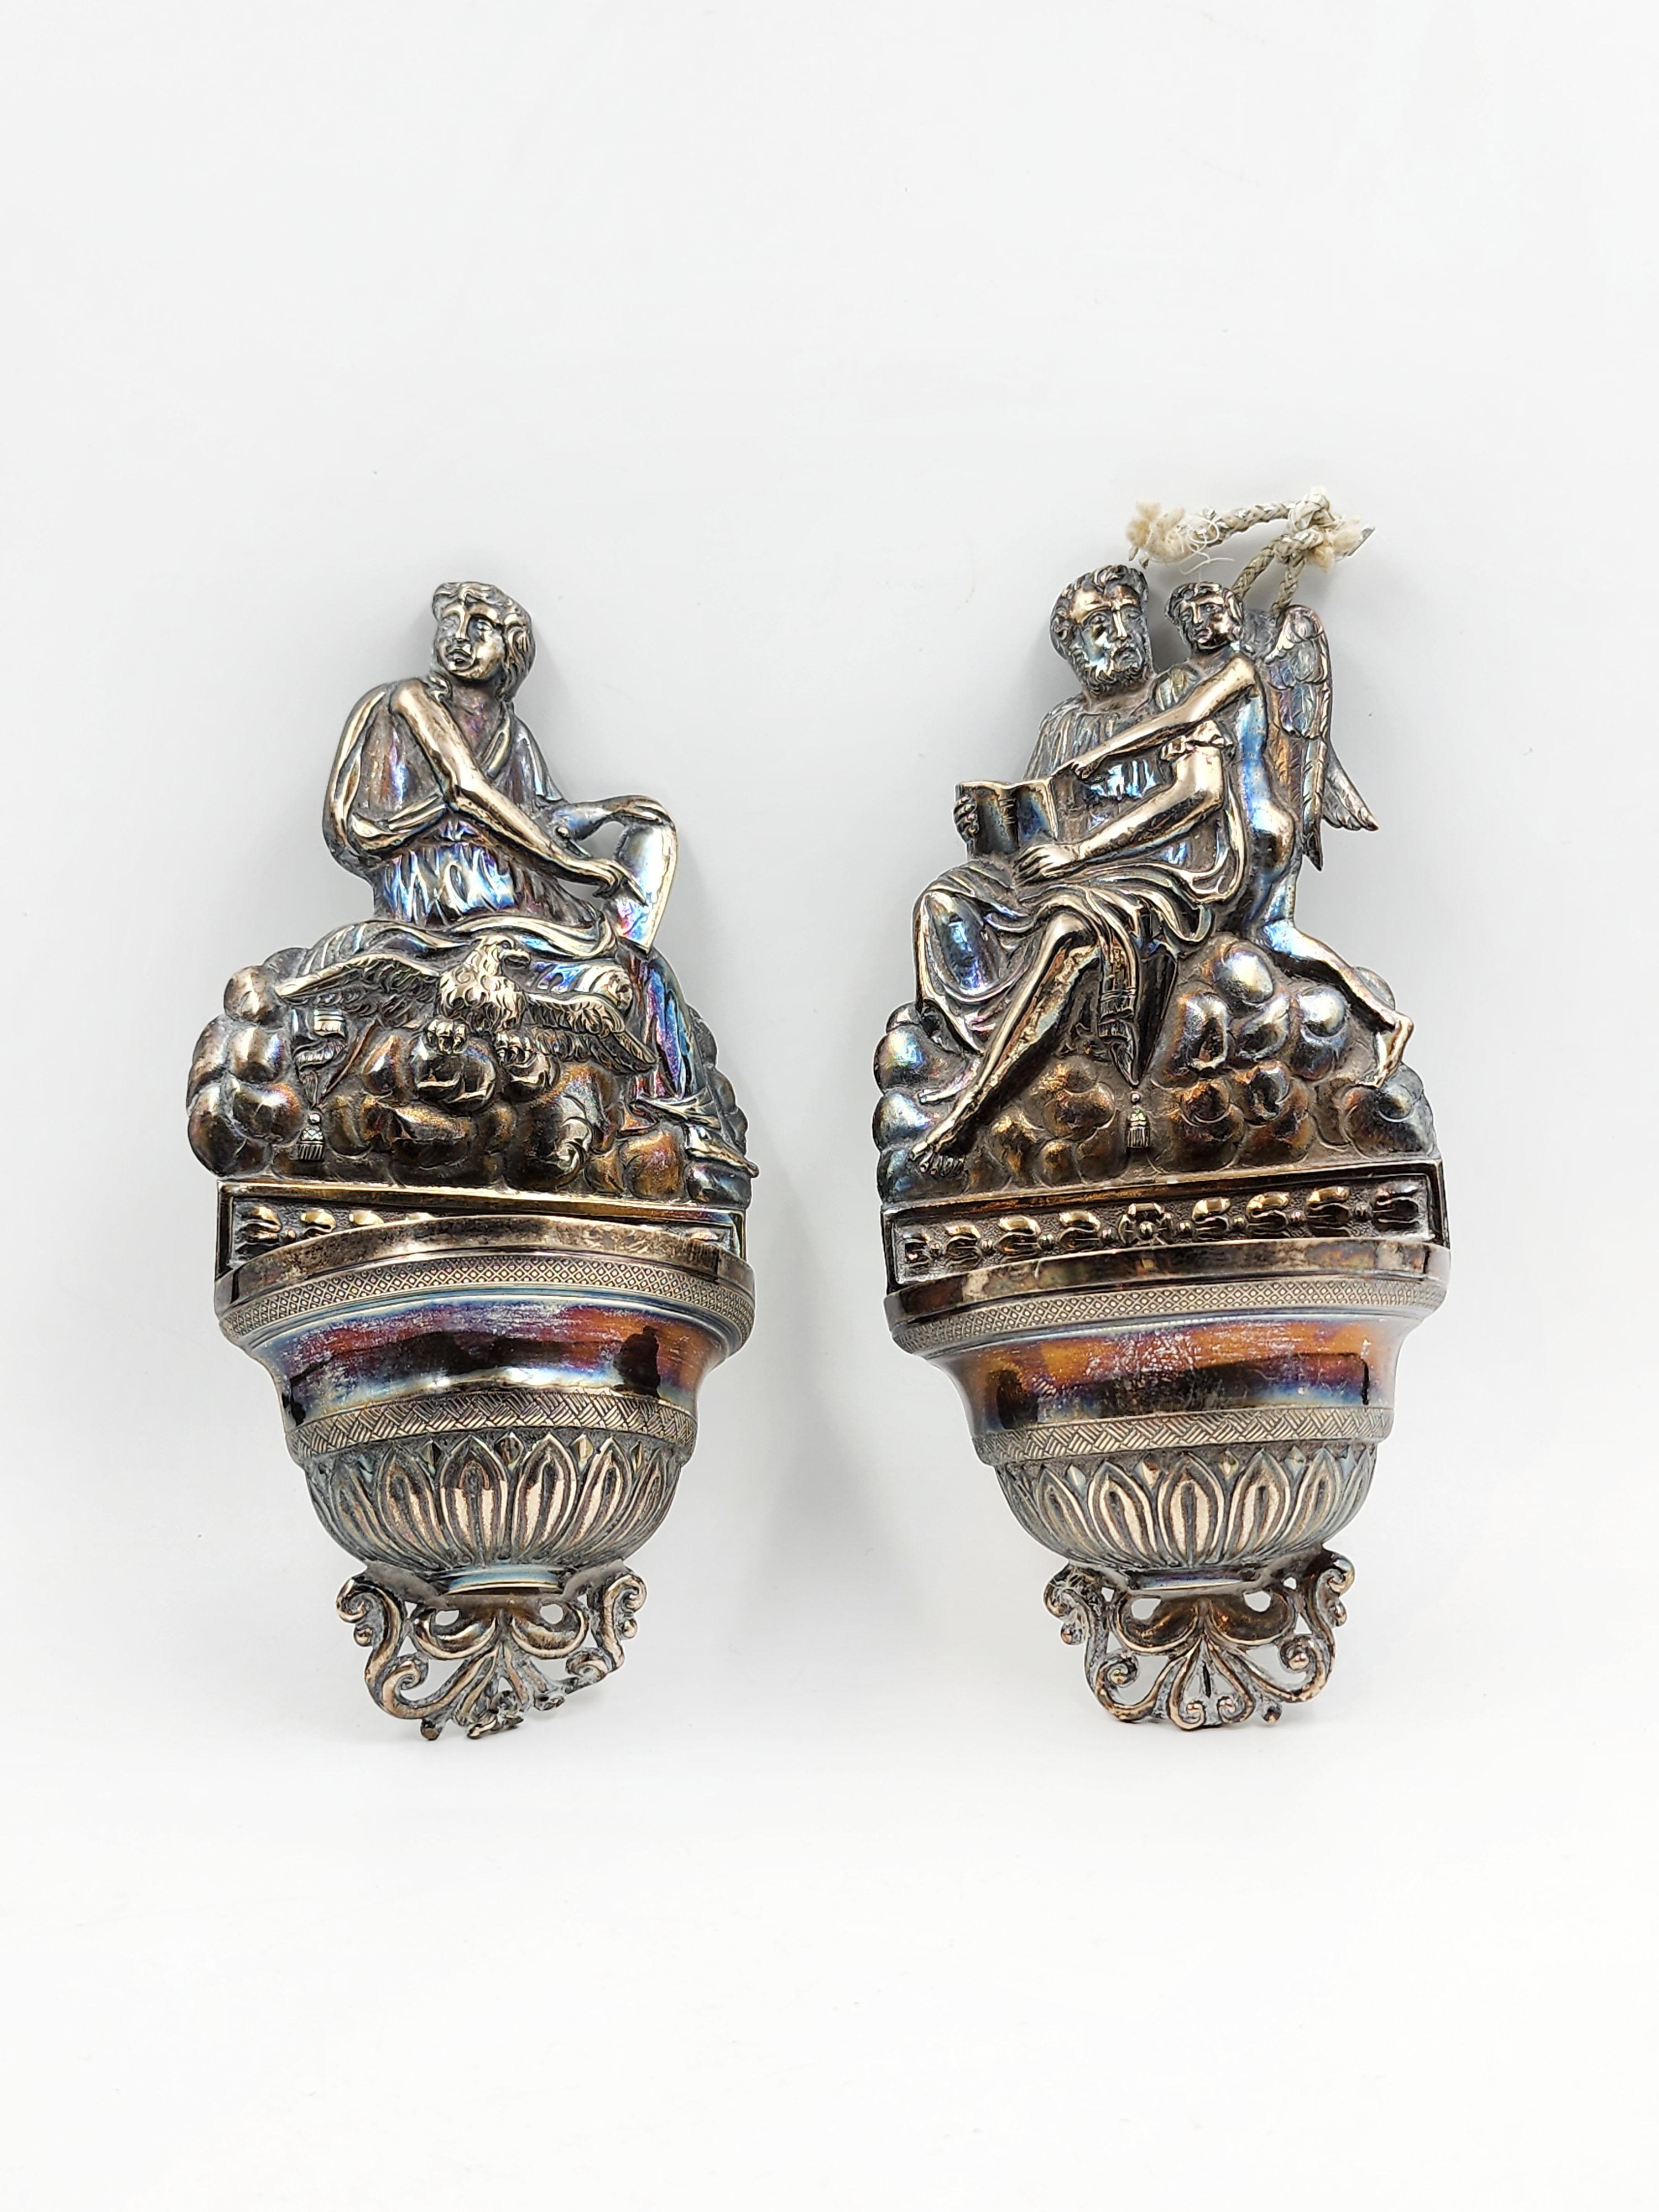 Antique Pair of sterling silver holy water fonts
This splendid pair of embossed silver basins from the 19th century are true masterpieces of craftsmanship. Each one with a different figure, in one the representation of God with an angel and in the